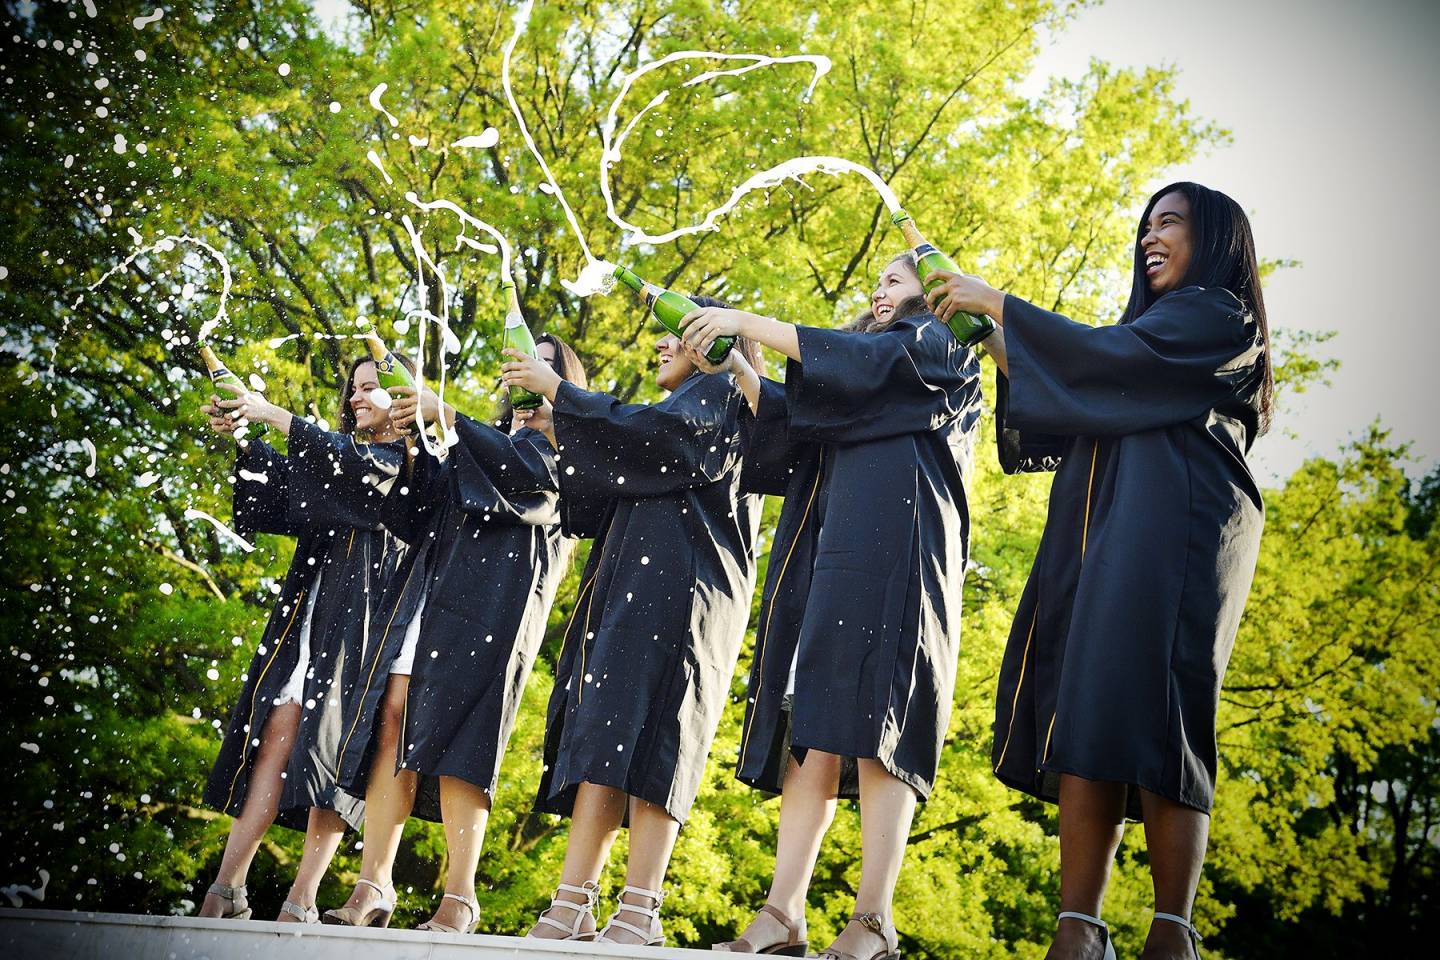 Graduates in caps and gowns spray champagne